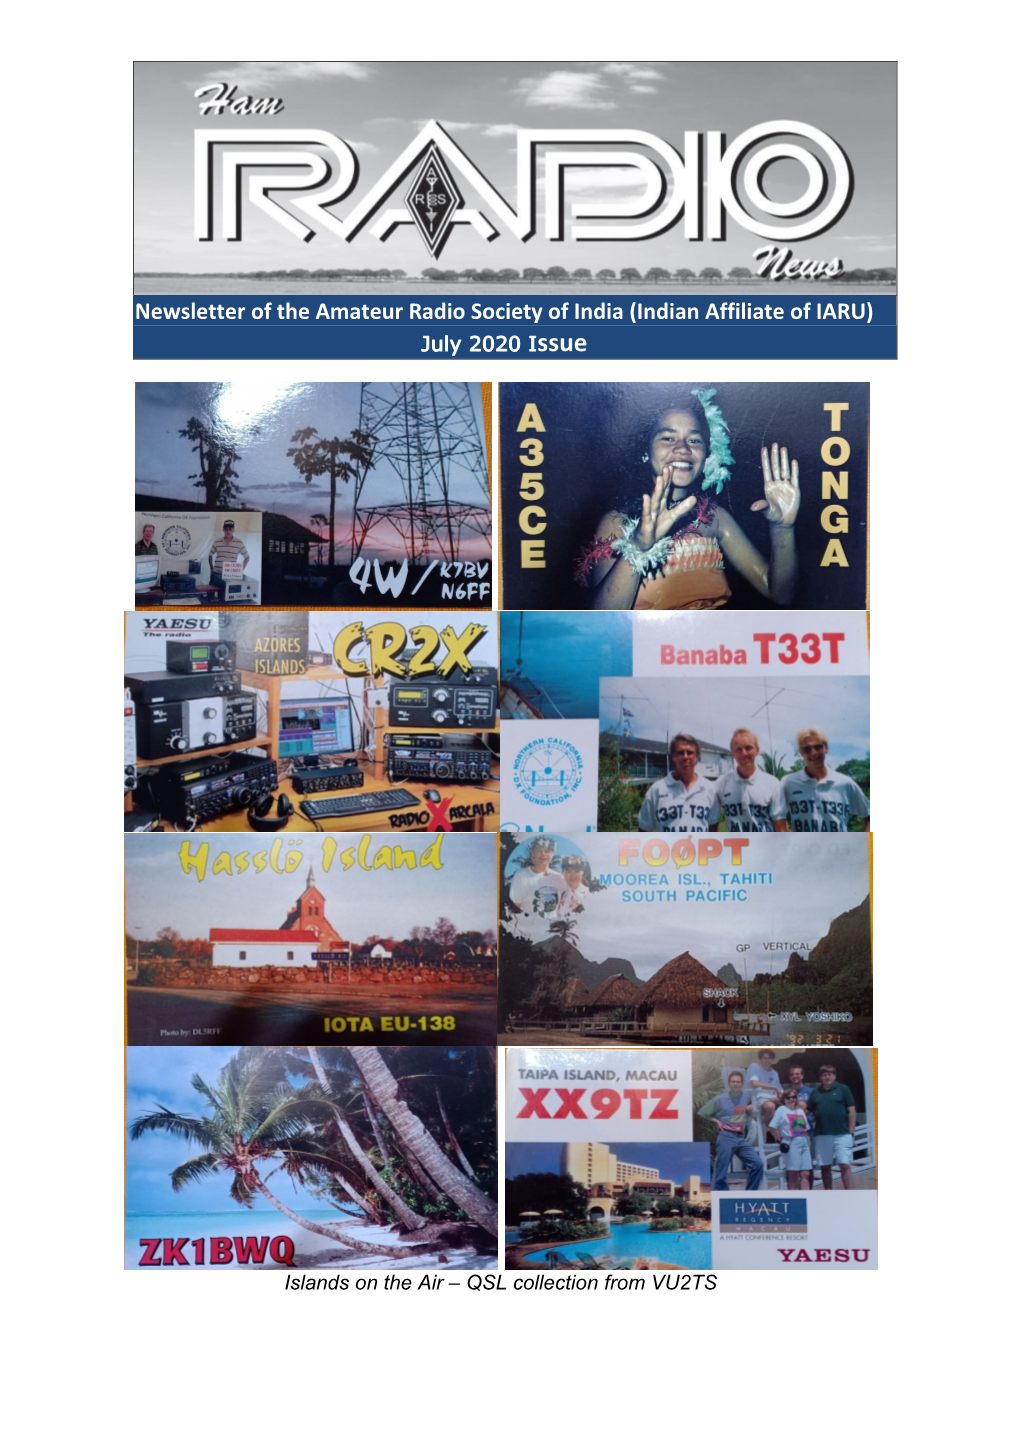 Newsletter of the Amateur Radio Society of India (Indian Affiliate of IARU) July 2020 Issue